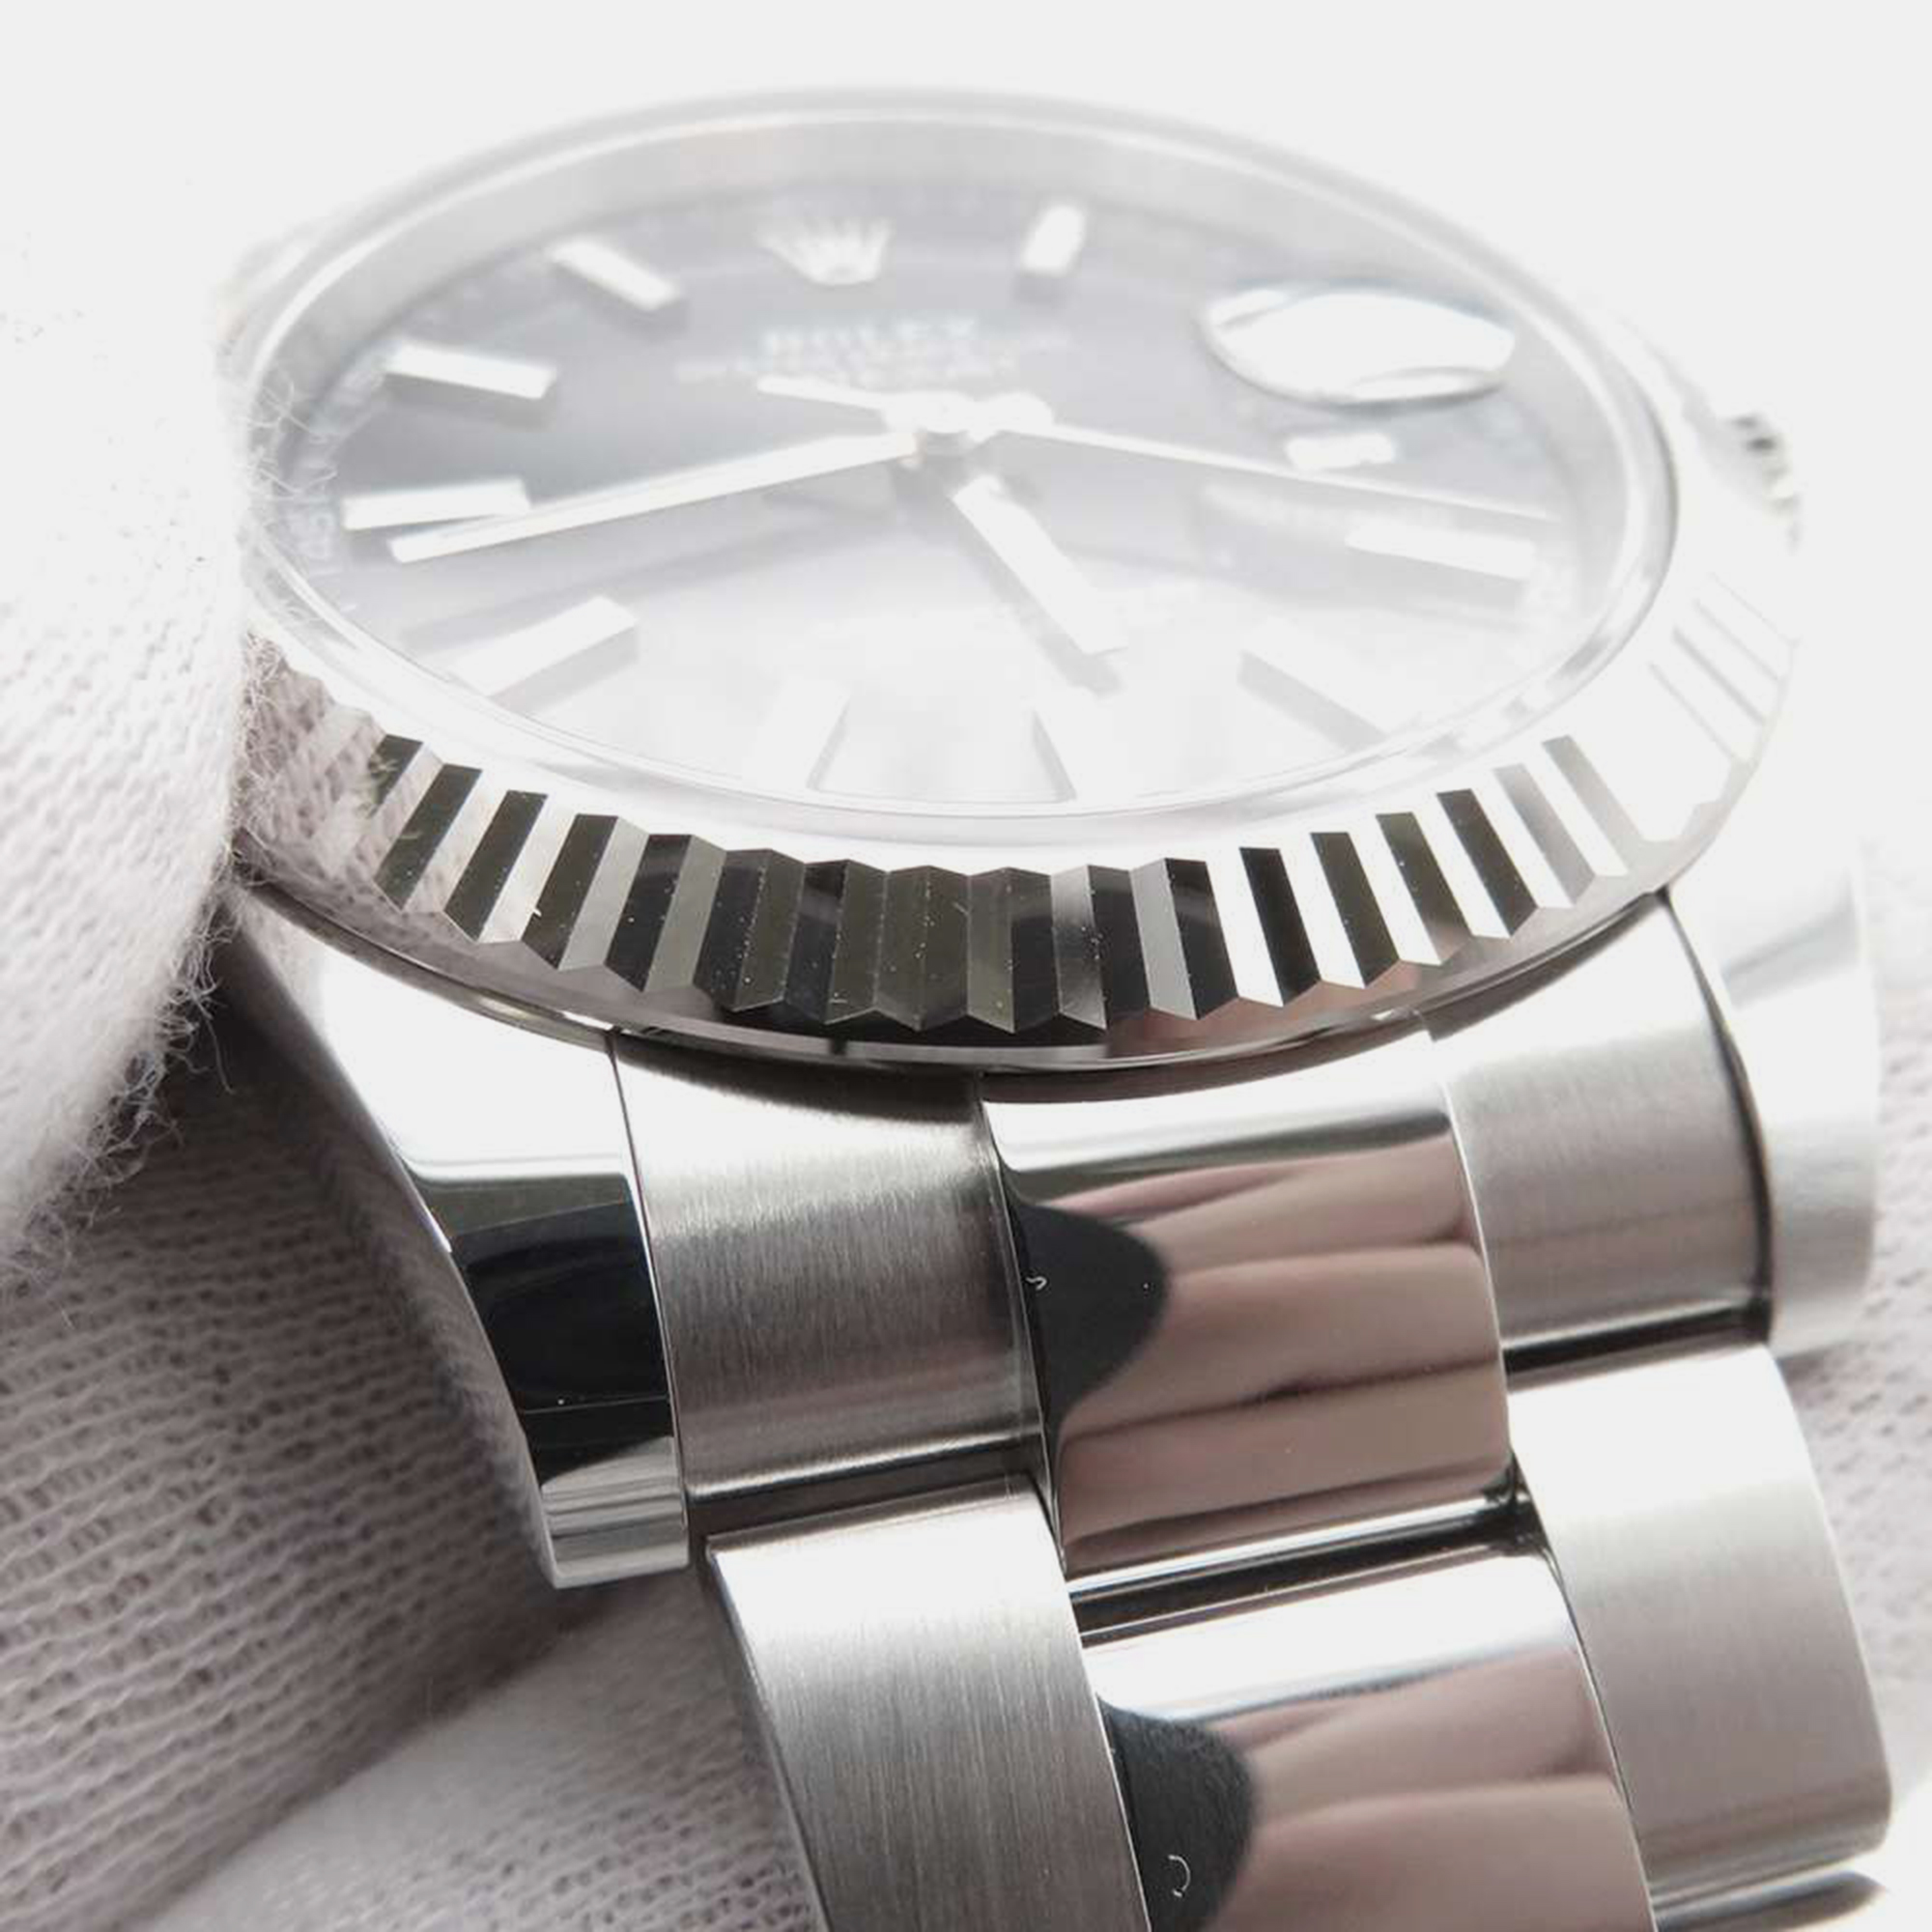 Rolex Black 18k White Gold And Stainless Steel Datejust 126334 Automatic Men's Wristwatch 41 Mm